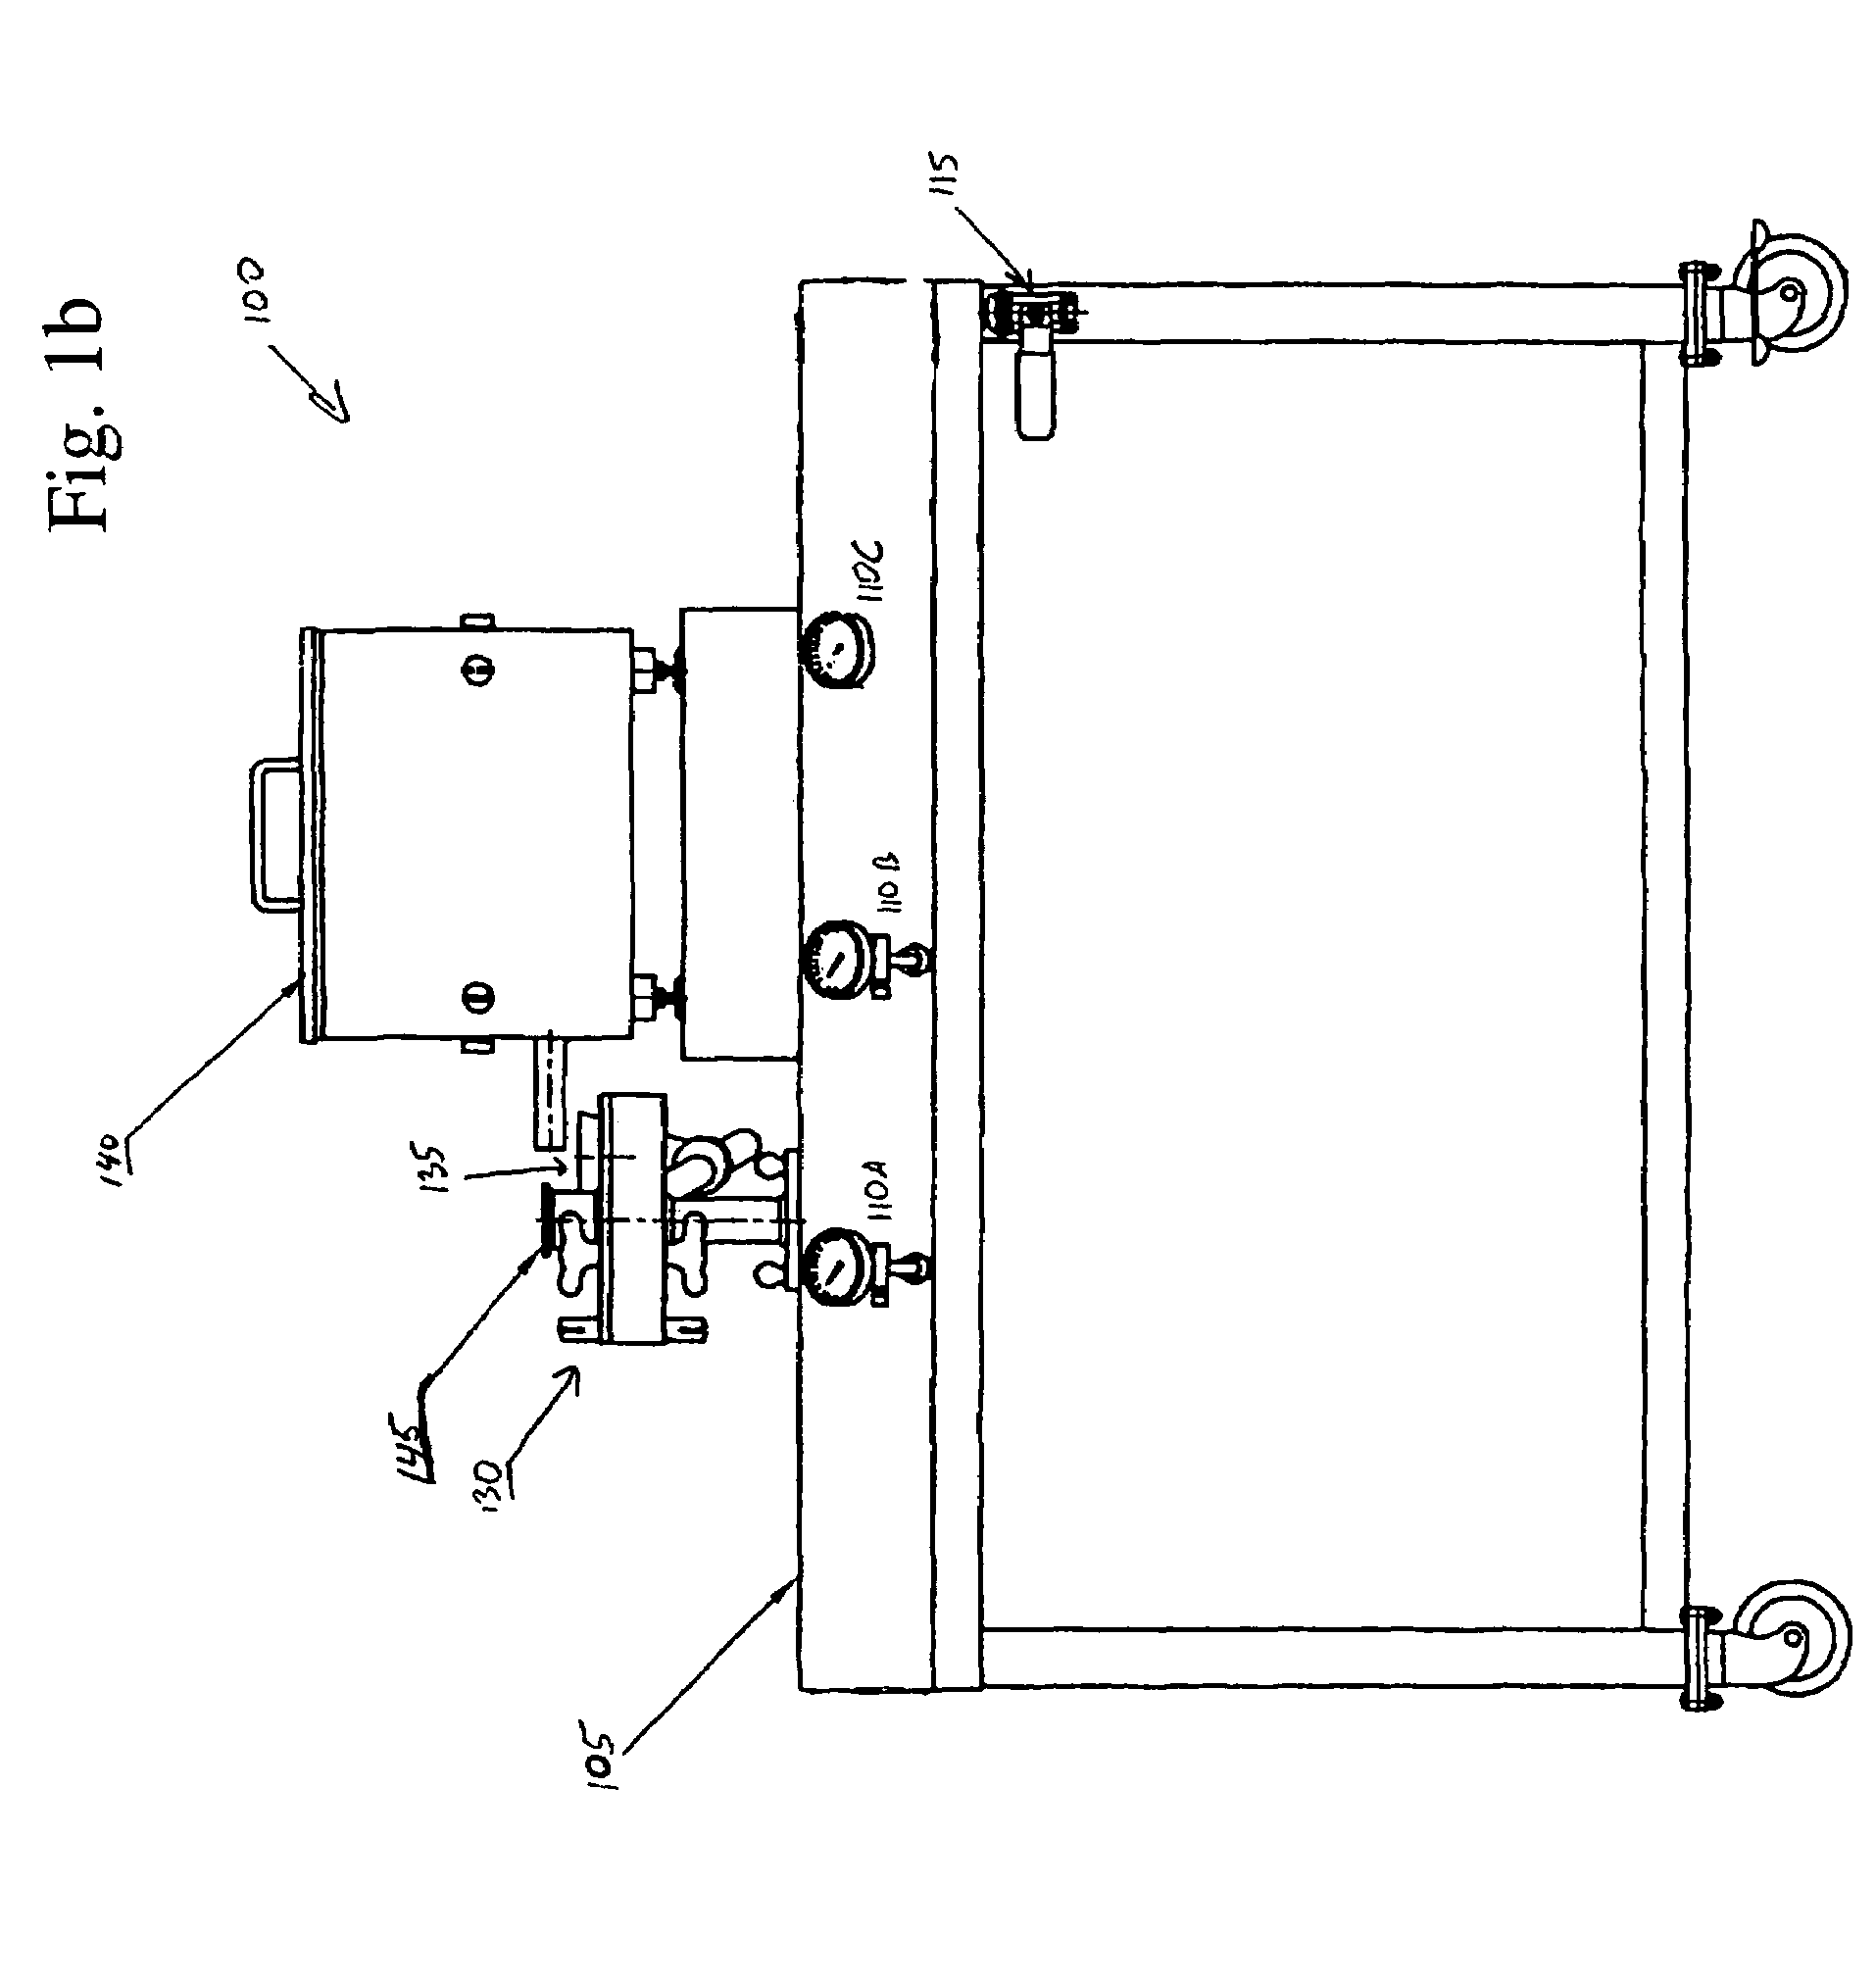 Dry particle based capacitor and methods of making same